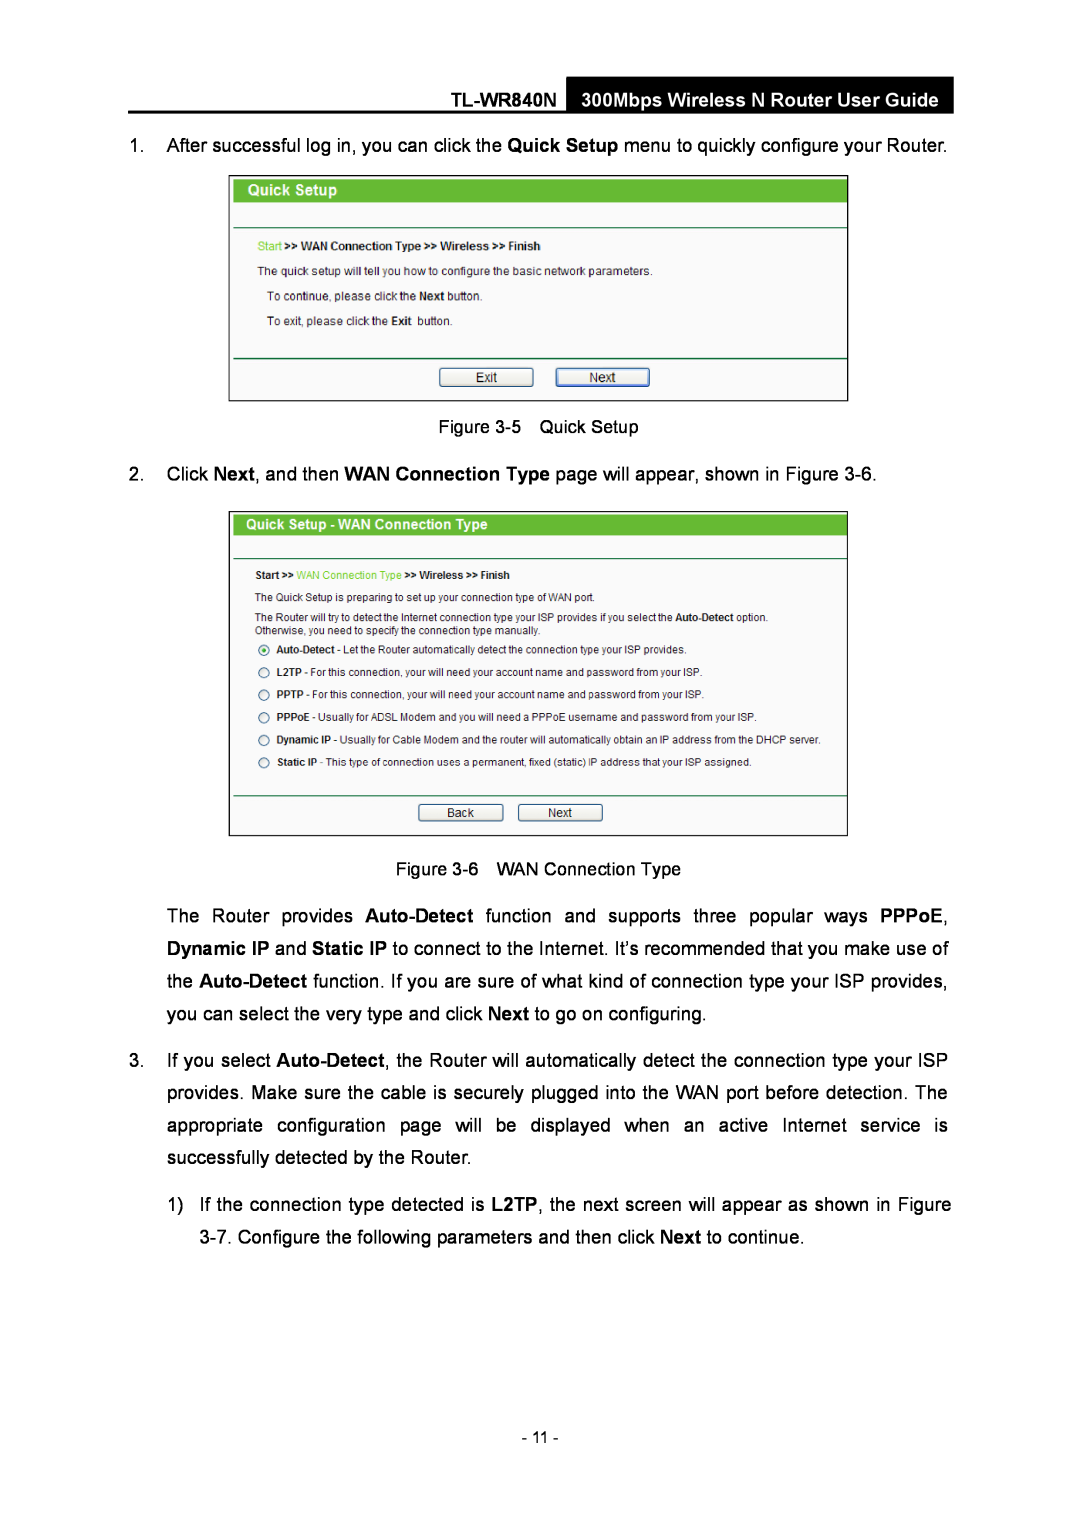 TP-Link manual TL-WR840N 300Mbps Wireless N Router User Guide, 5 Quick Setup, 6 WAN Connection Type 